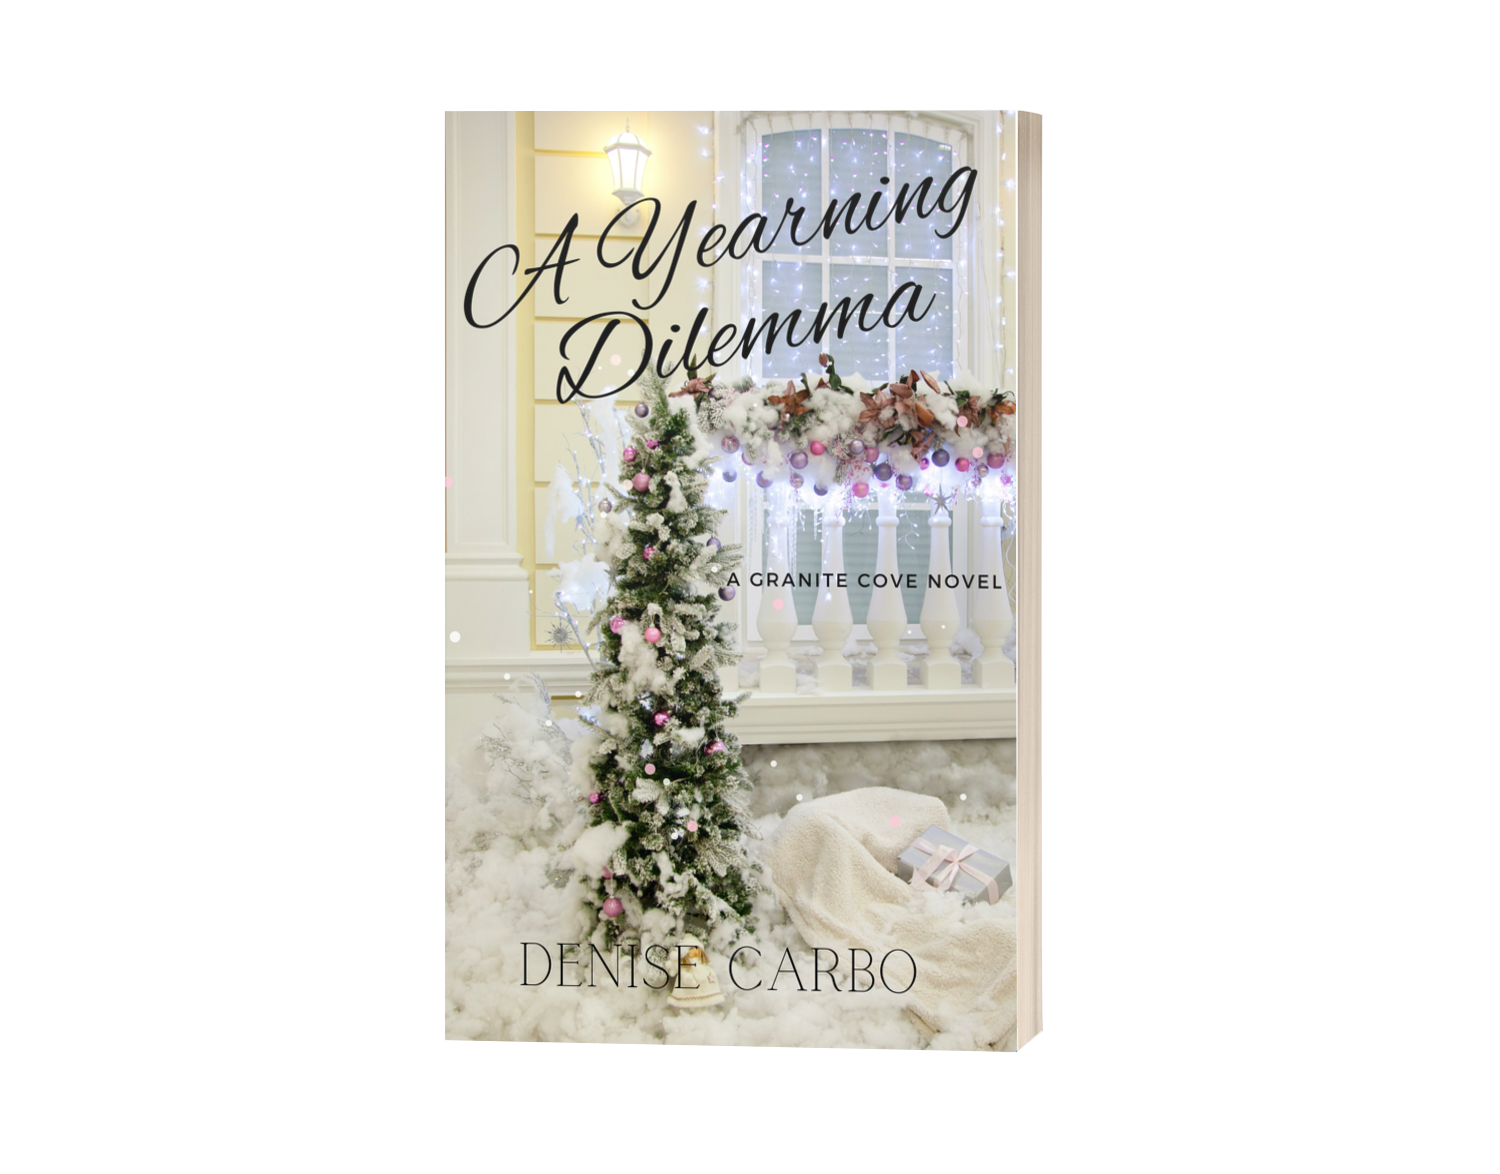 A Yearning Dilemma paperback cover